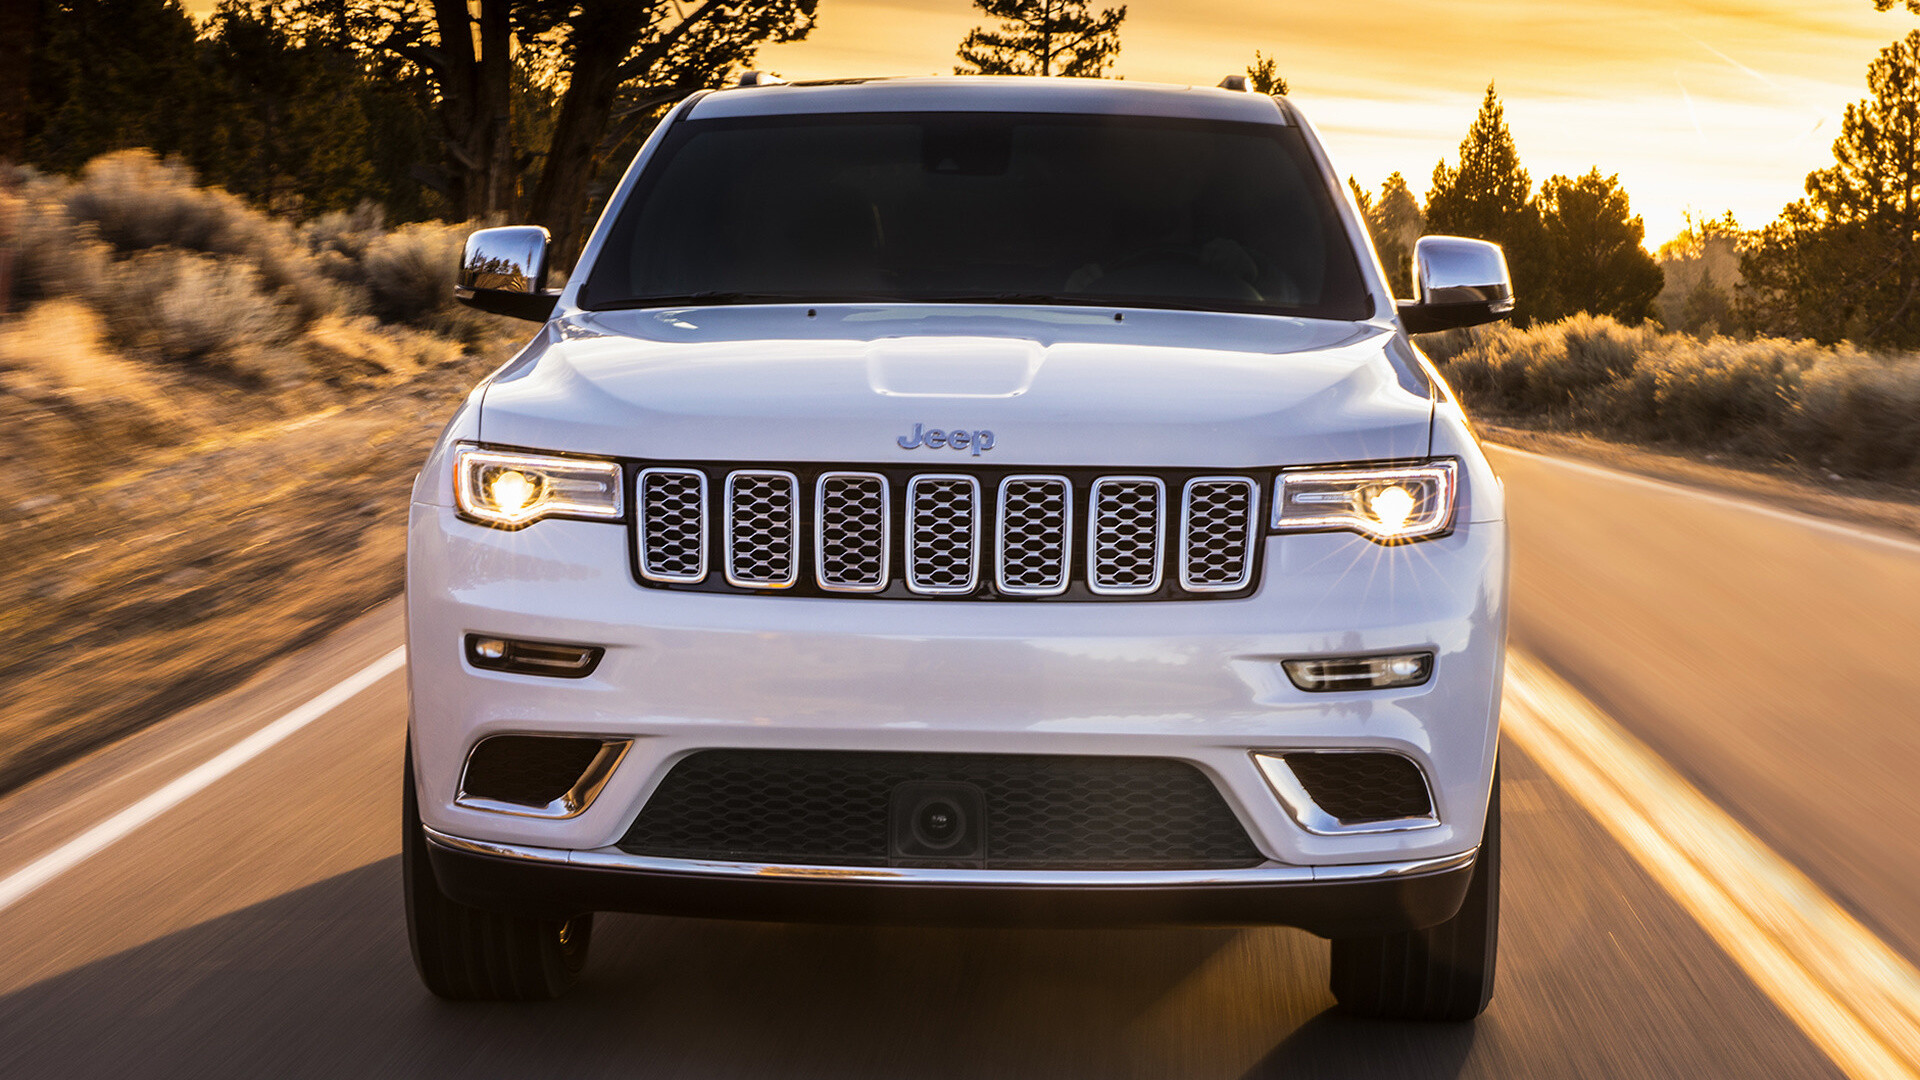 Jeep Grand Cherokee: 2017 Summit, Trim level, Capable of an off-road adventure. 1920x1080 Full HD Background.